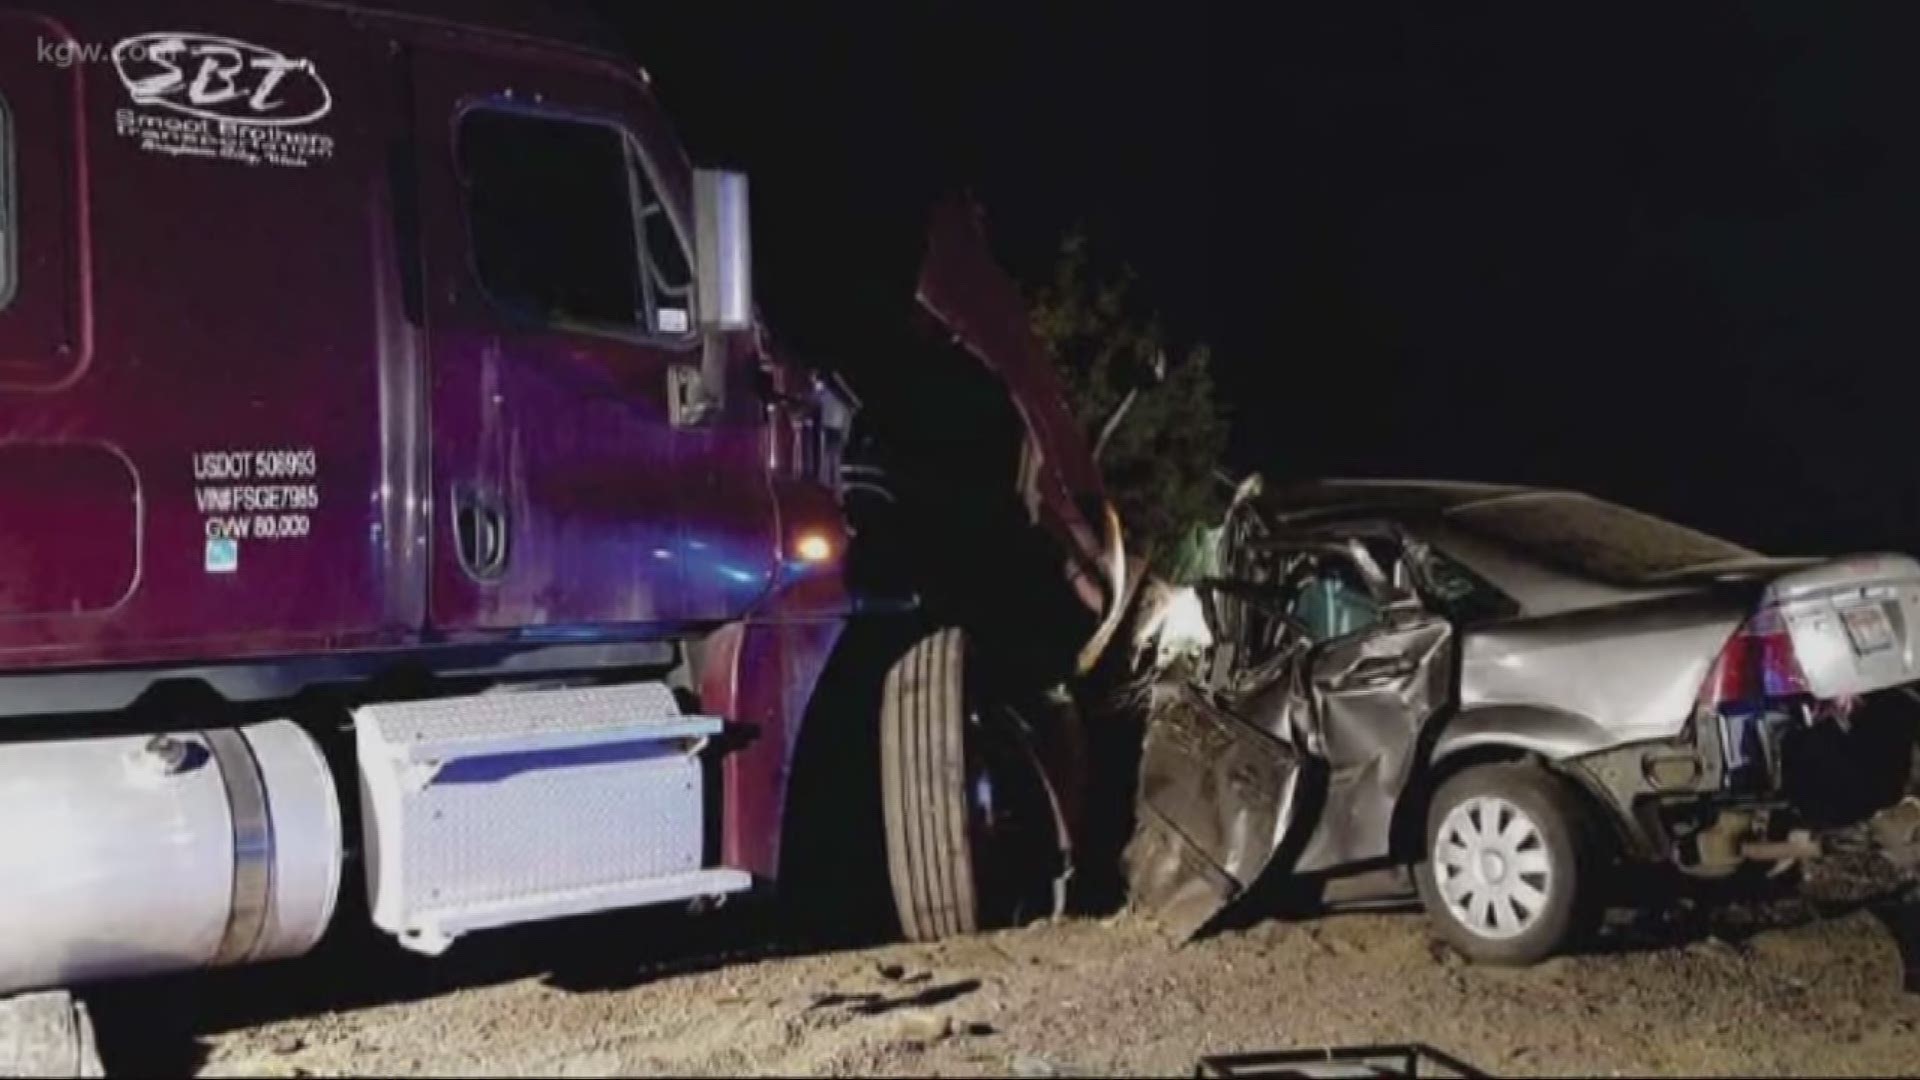 Truck companies will pay more than $26 million in a fatal crash settlement.